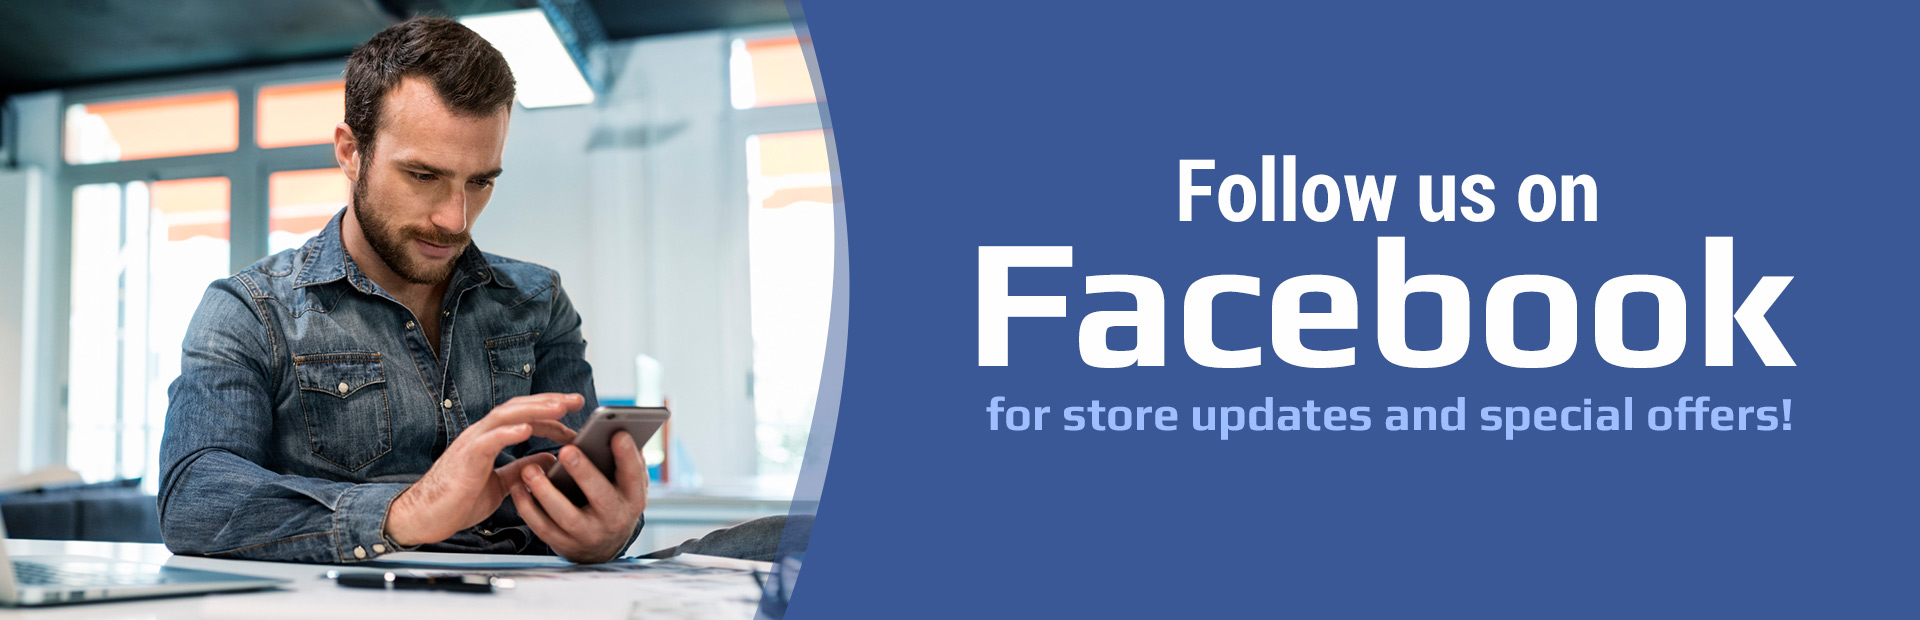 Follow Us on Facebook for Store Updates and Special Offers